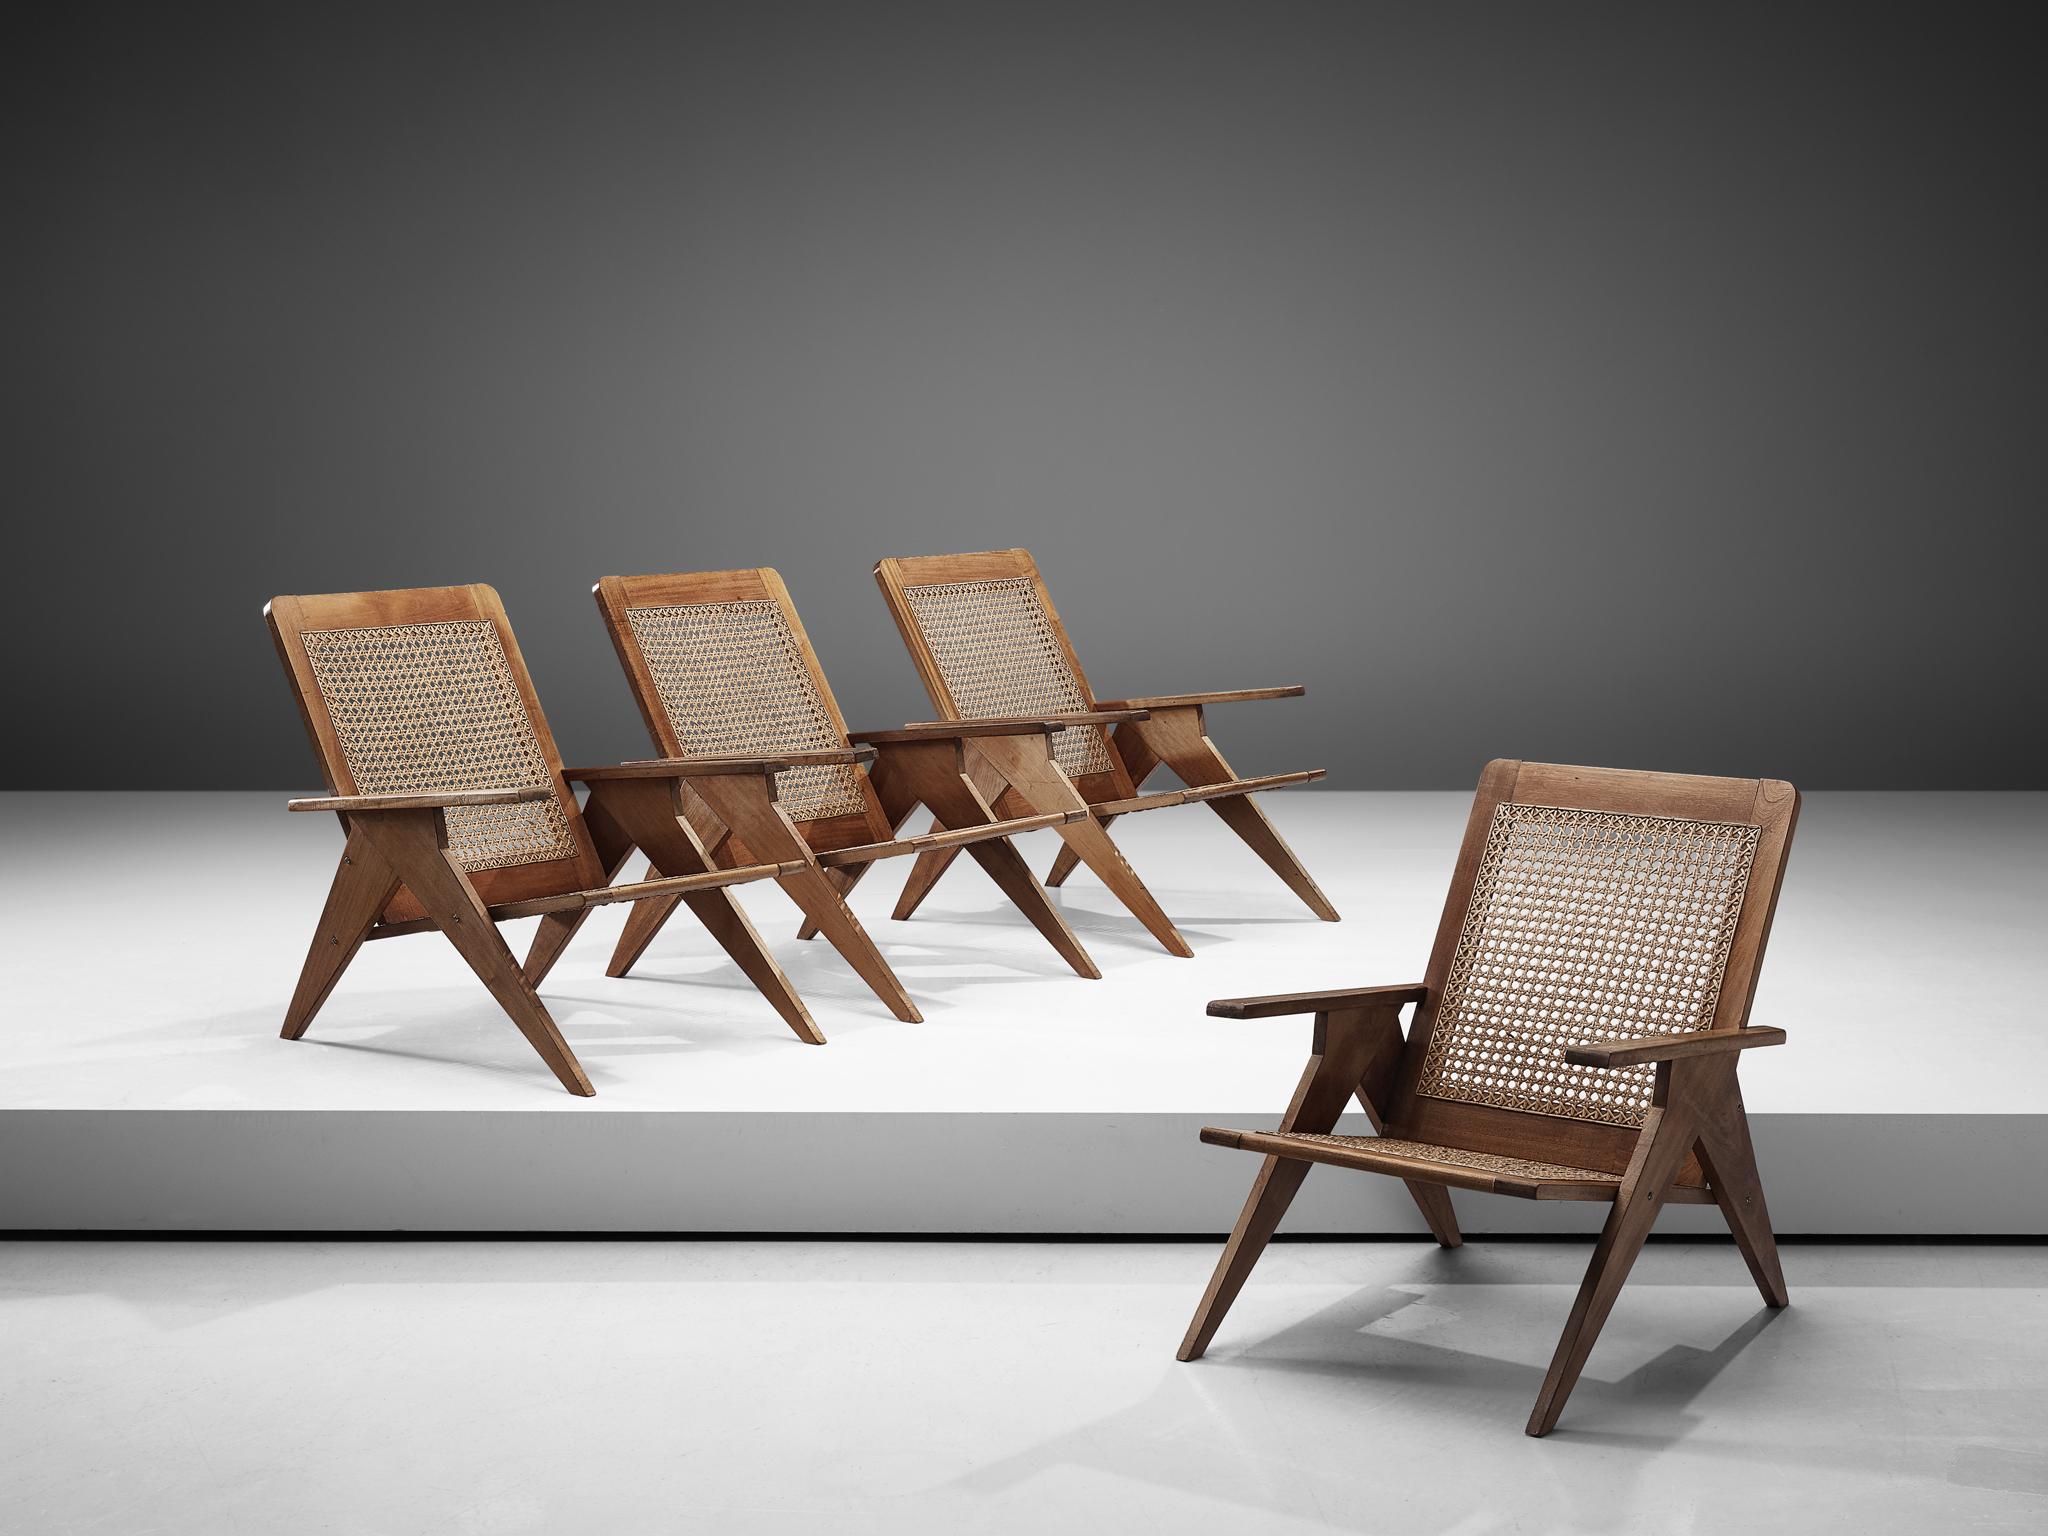 Set of 4 lounge chairs, cane and mahogany, France, 1960s

This set of French lounge chairs shows wonderful, sculptural details. The straight armrests and the tapered, triangular shaped legs combine beautifully with its woven cane seat. The chairs